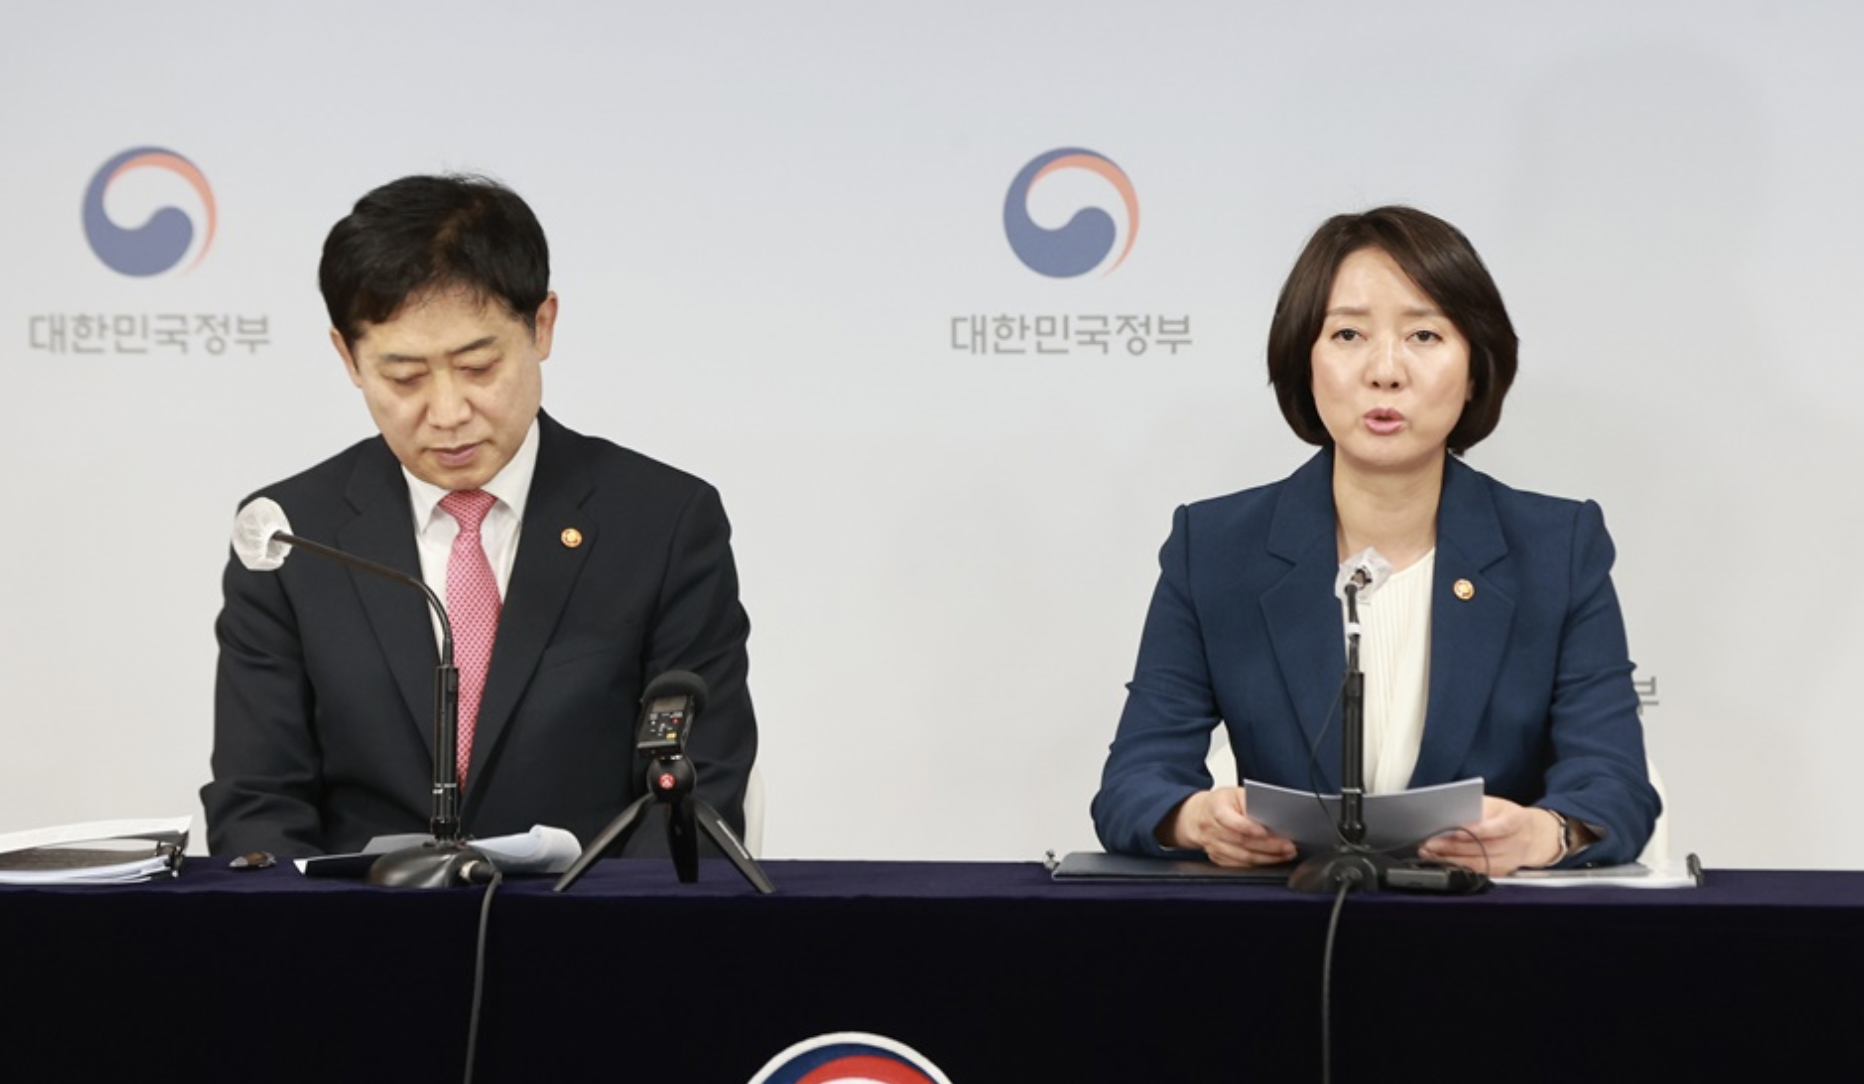 Lee Young (right), Minister of SMEs and Startups, and Kim Joo-hyun, Chairman of the Financial Services Commission, announcing plans to support innovative ventures and startups